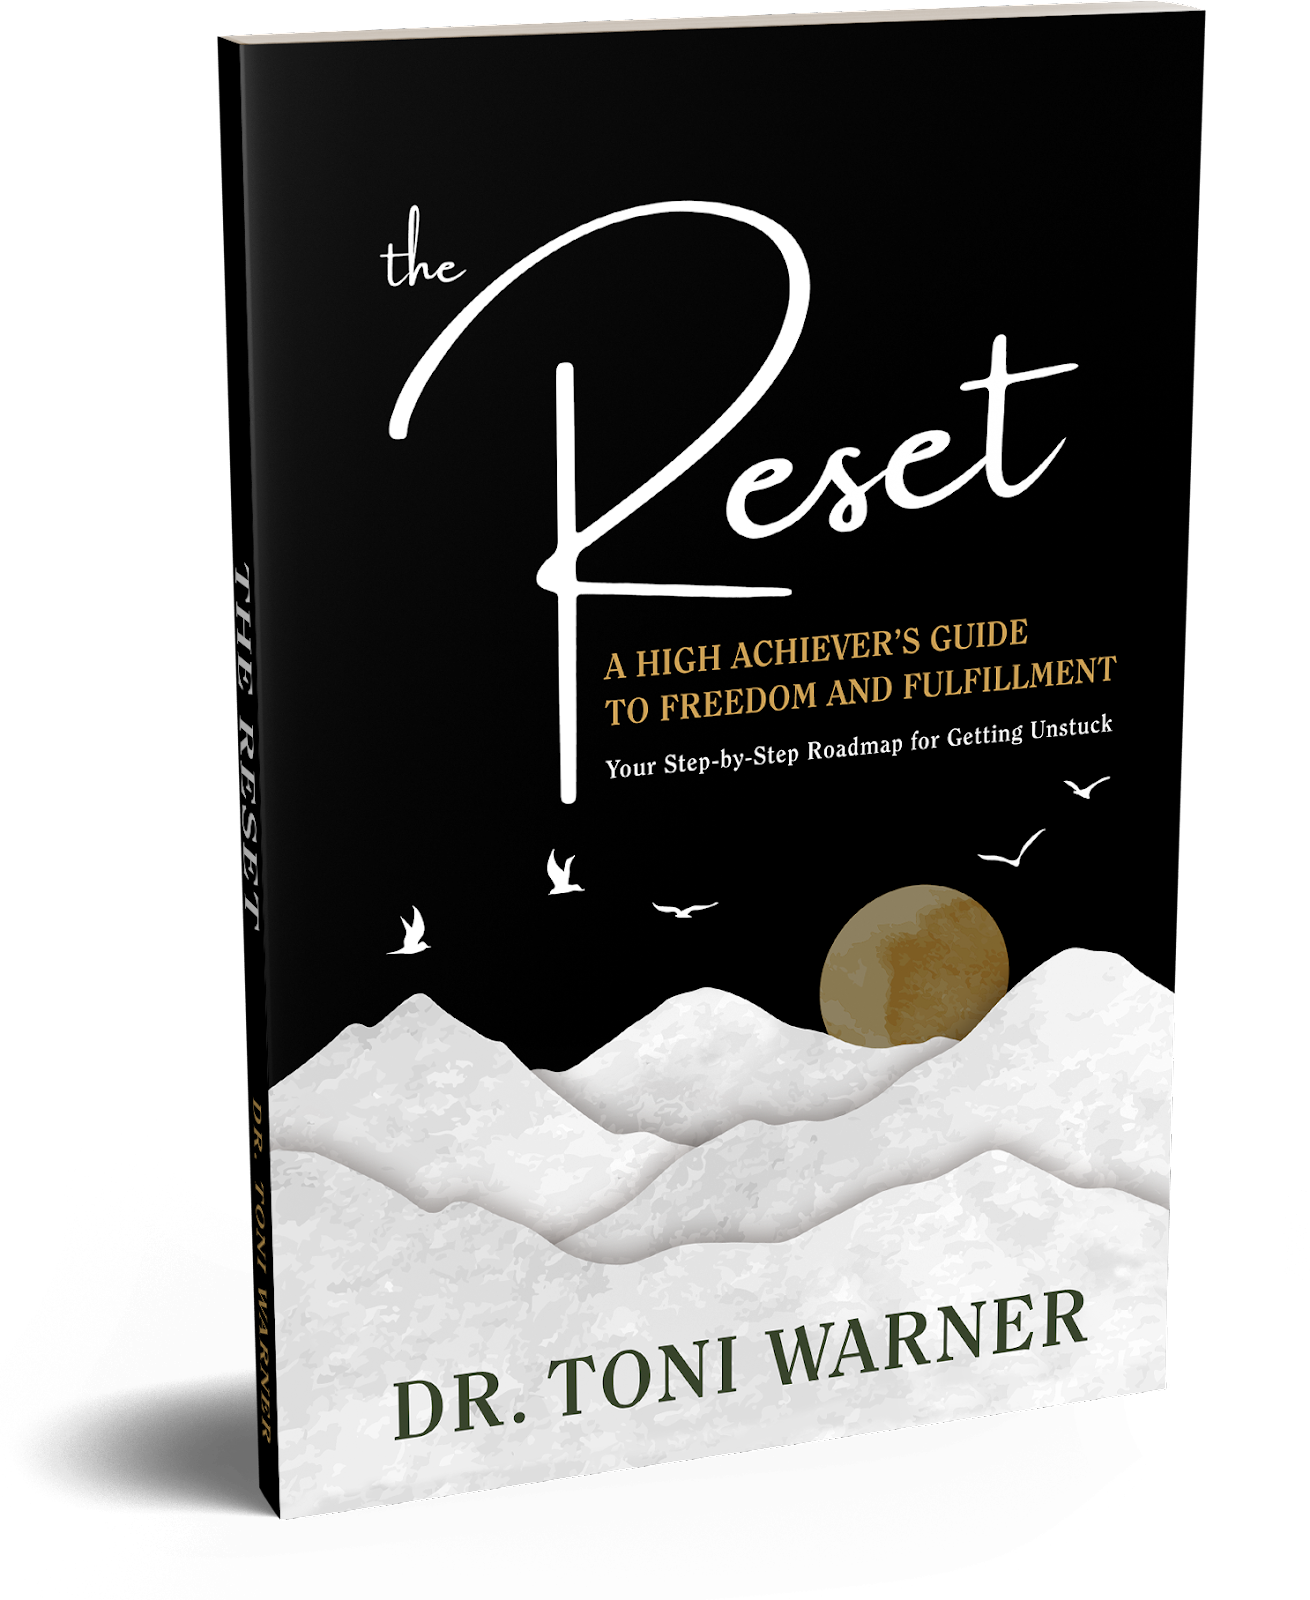 The Reset by Dr. Toni Warner